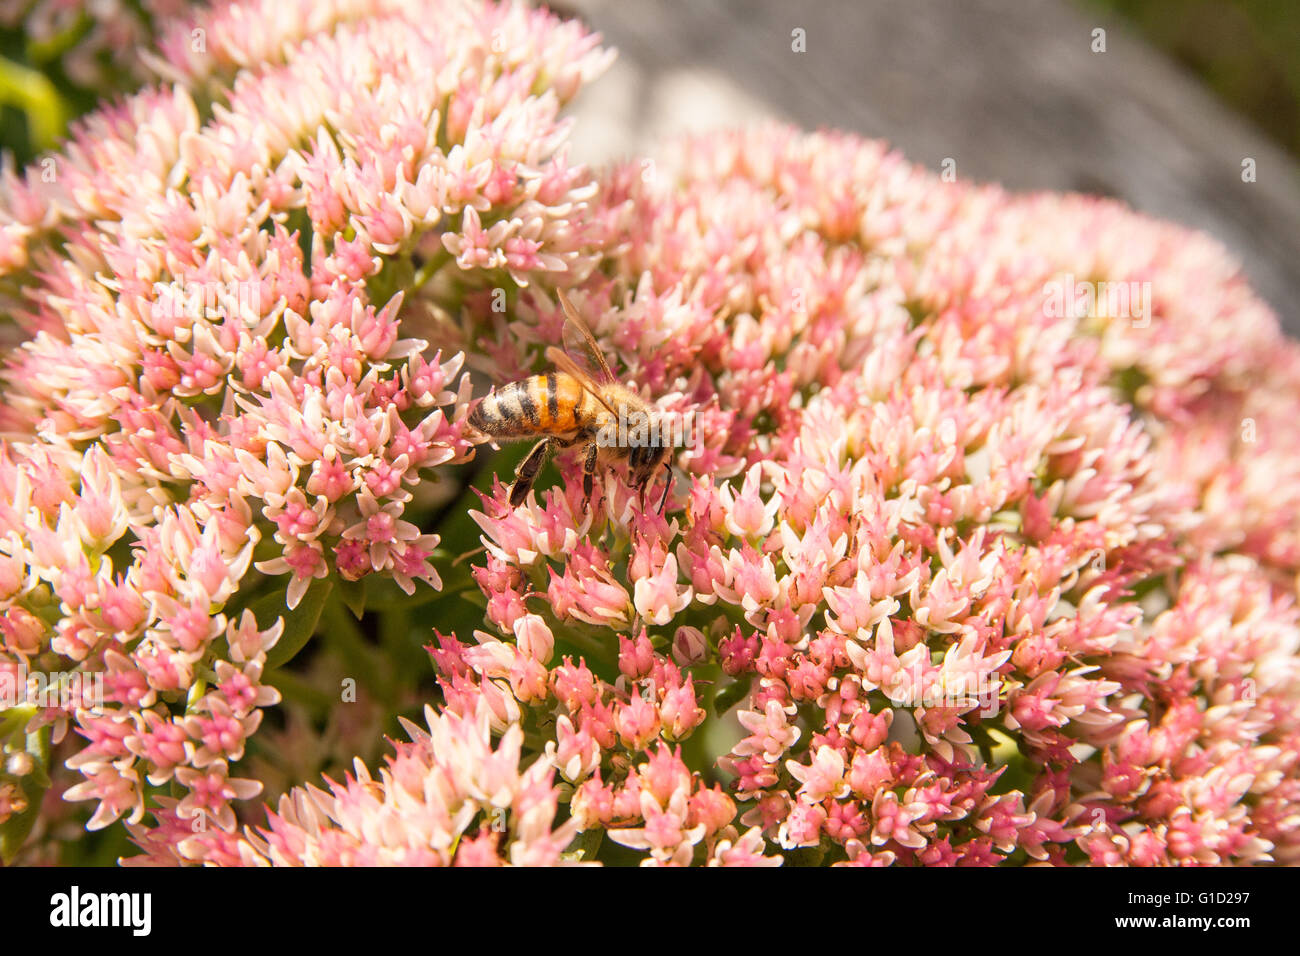 A bee pollinating the flowers of a sedum, fall flowering plant. Stock Photo